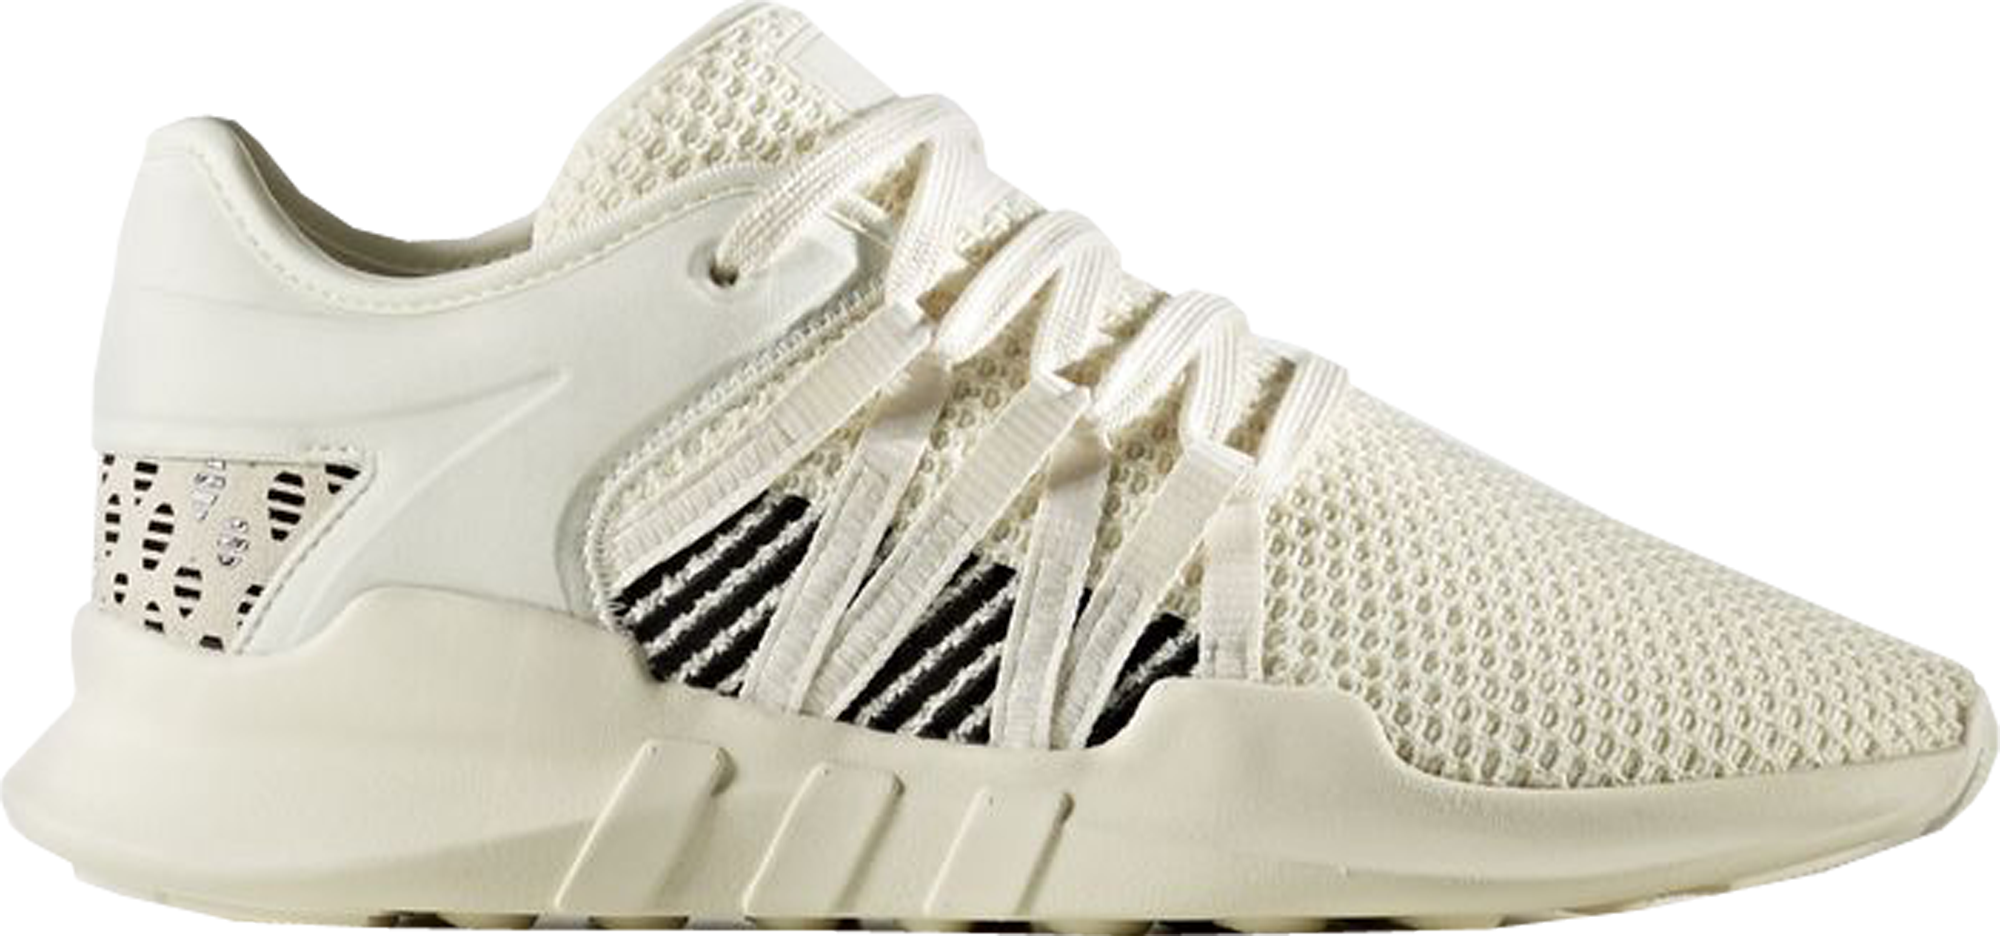 adidas originals eqt racing adv trainers in off white hld